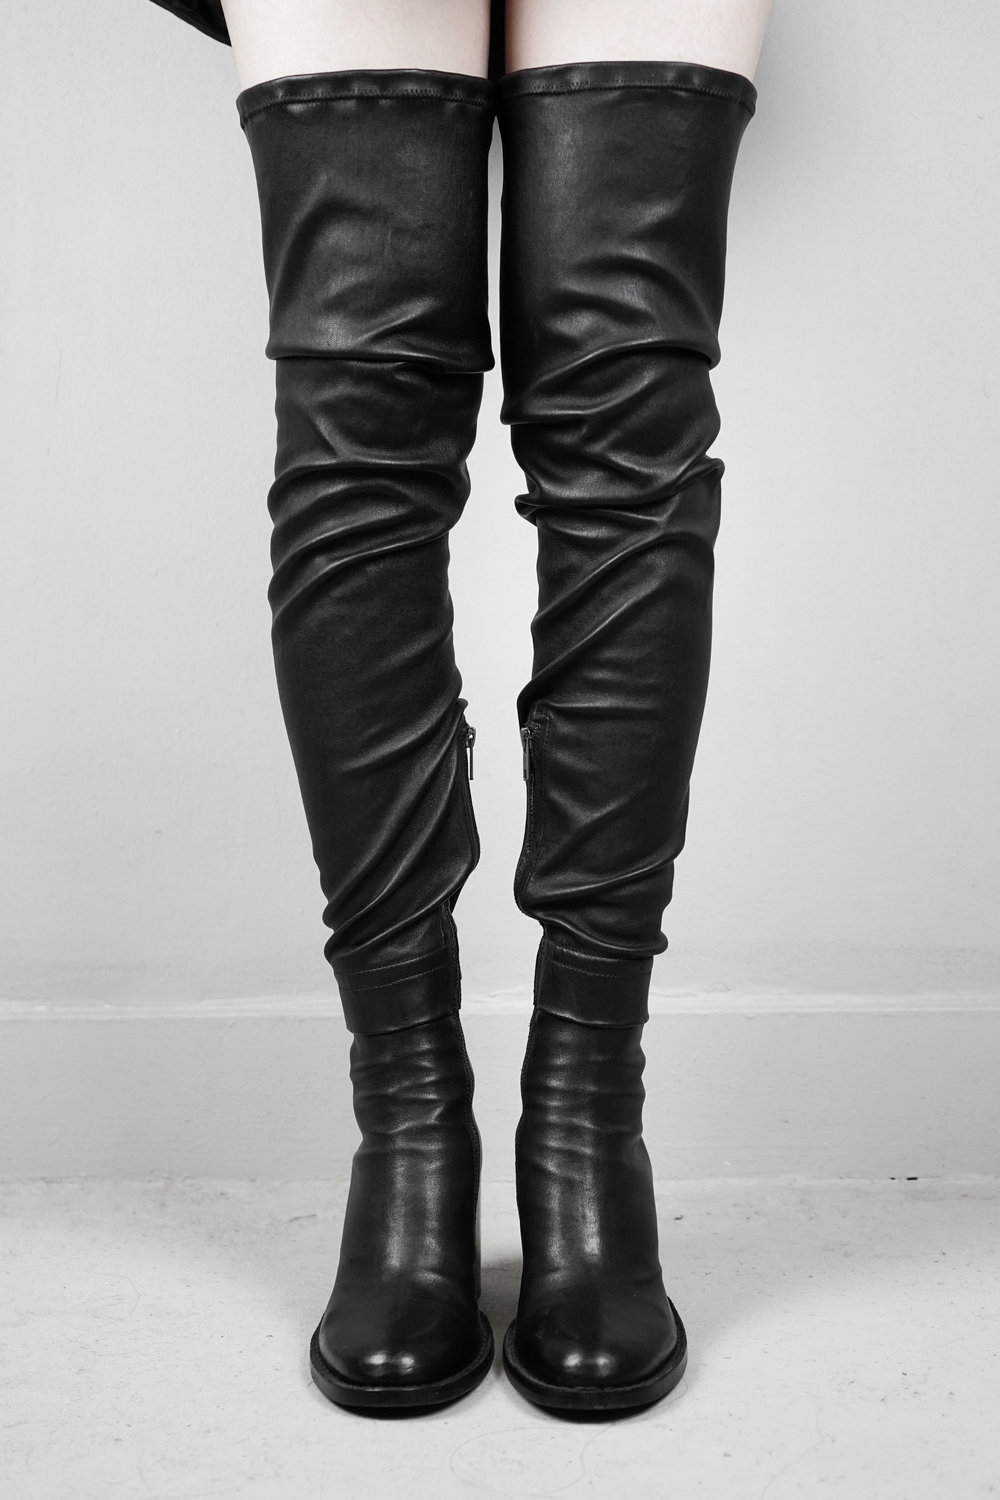 Ann Demeulemeester – Womens – Thigh High Boots – Black – Leather – Almond Toe – Chunky Mid Heel